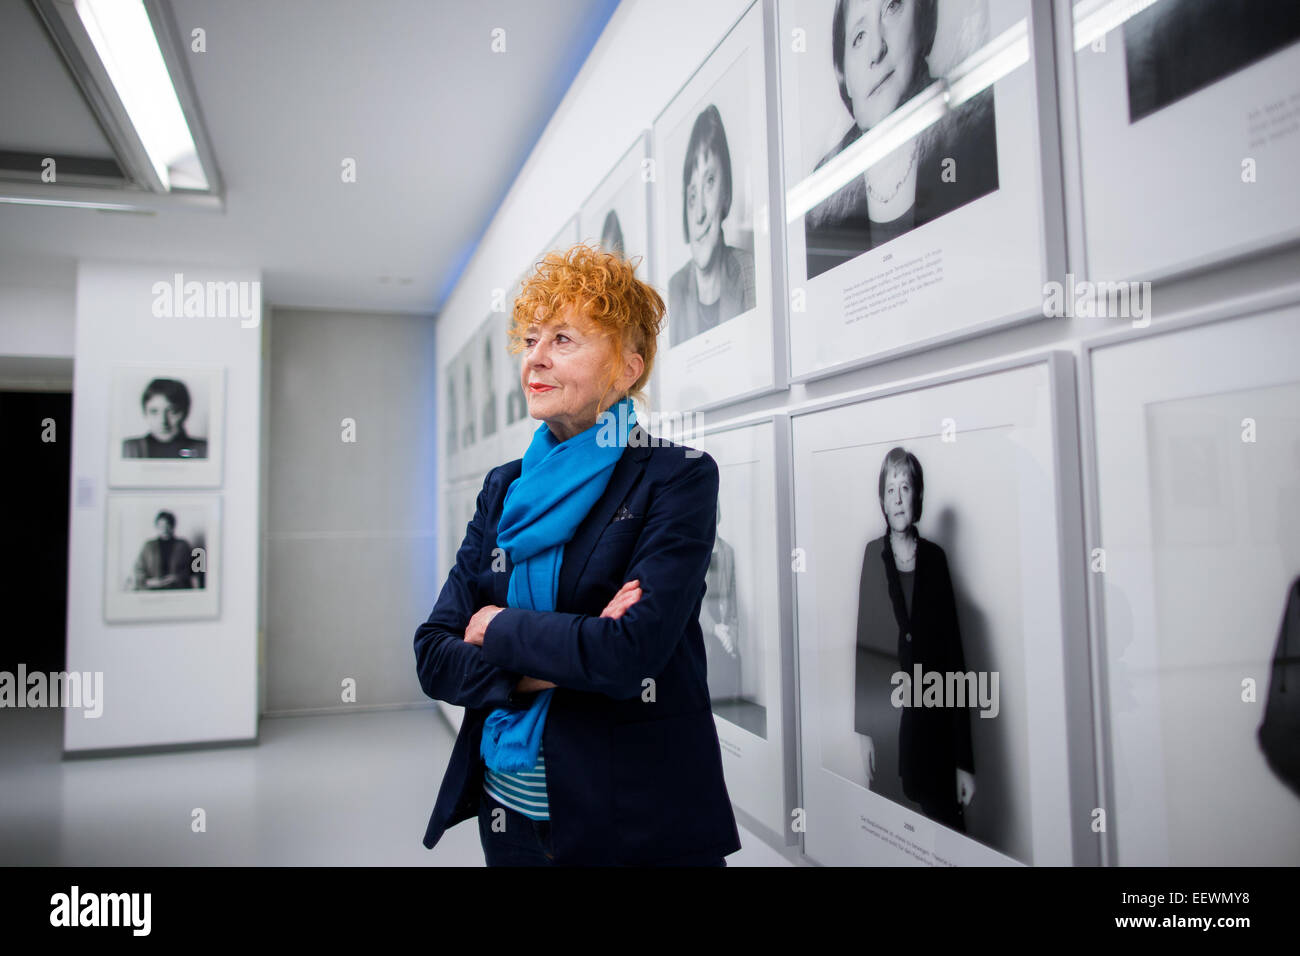 Photographer Herlinde Koelbl poses in front of photographs from her series 'Spuren der Macht' (lit. Traces of power) in the Ludwig Galerie Schloss Oberhausen in Oberhausen, Germany, 22 January 2015. The exhibition (25 January 2015 to 3 March 2015) entitled 'Das deutsche Wohnzimmer, Spuren der Macht, Haare und andere menschliche Dinge - Fotografien von 1980 bis heute' (lit. The German living room, traces of power, hair, and other human things - Photographs from 1980 to today' brings together works from the German artist's important artistic phases. Photo: RALF VENNENBERND/dpa Stock Photo